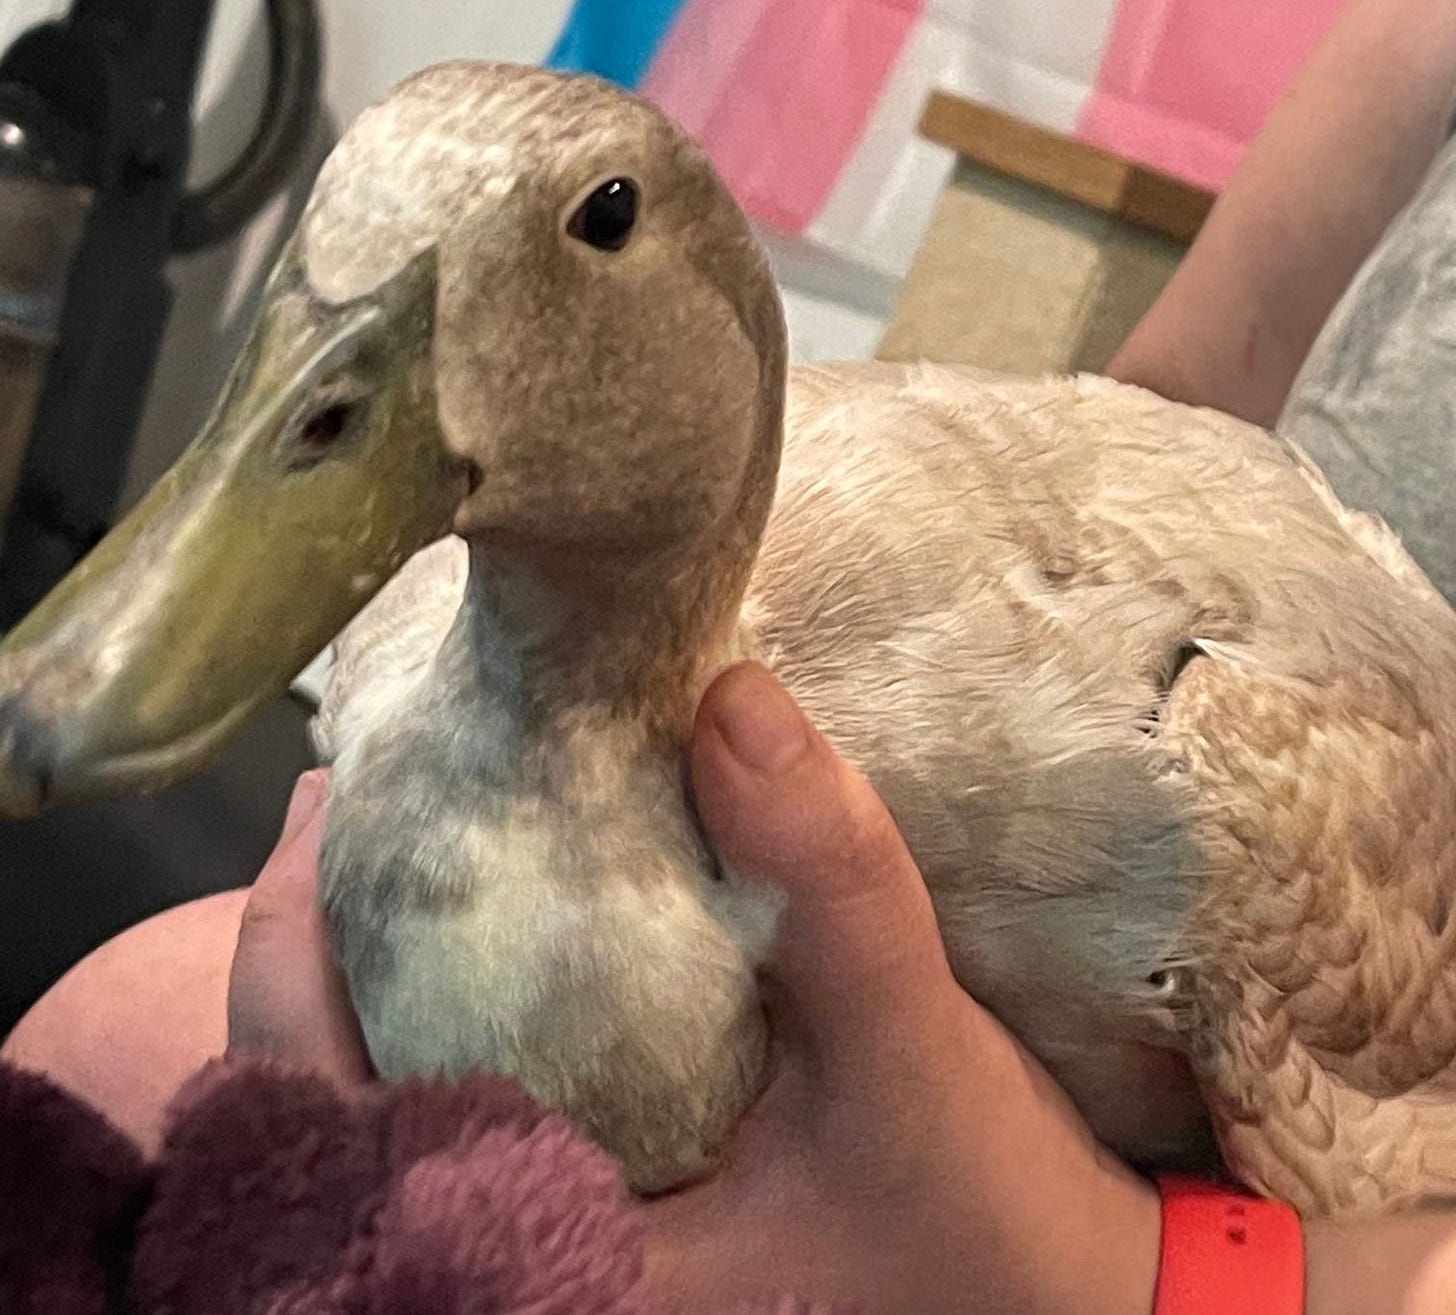 A khaki colored duck sitting in a human's lap in front of a trans flag.